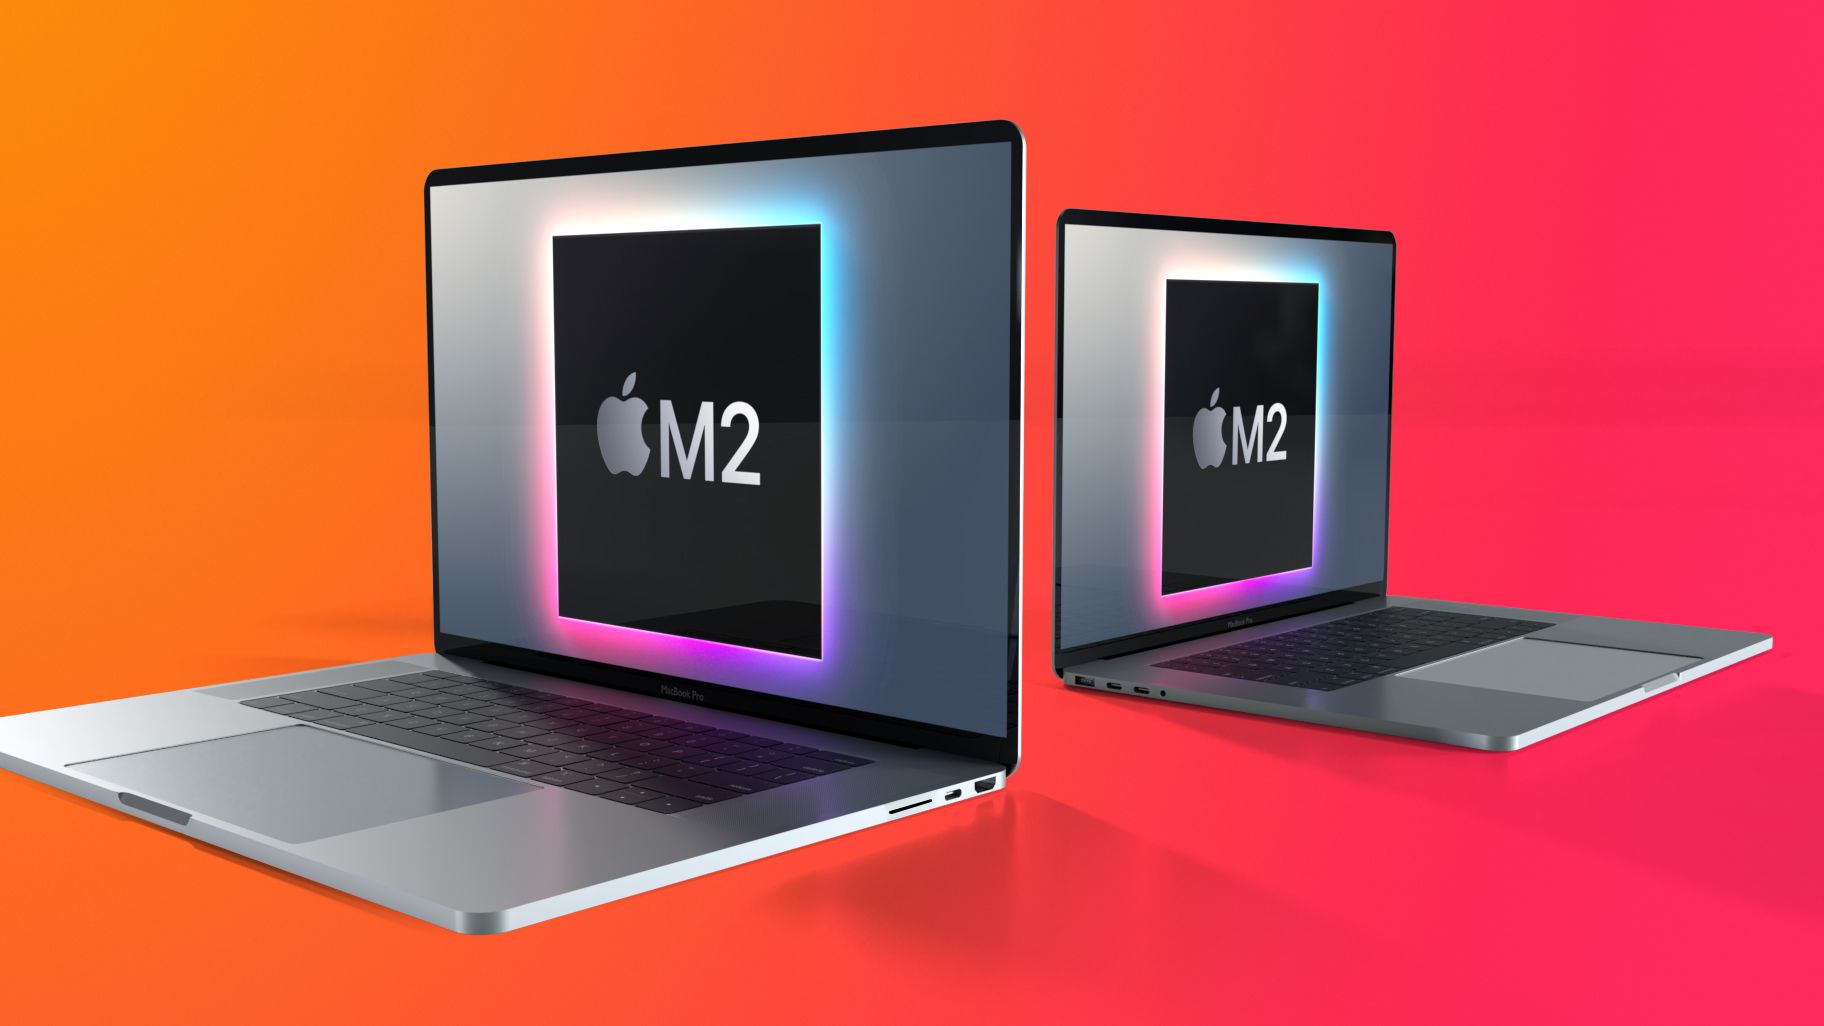 M2 MacBook 7 new features must give you great impression! RedTom good things you like